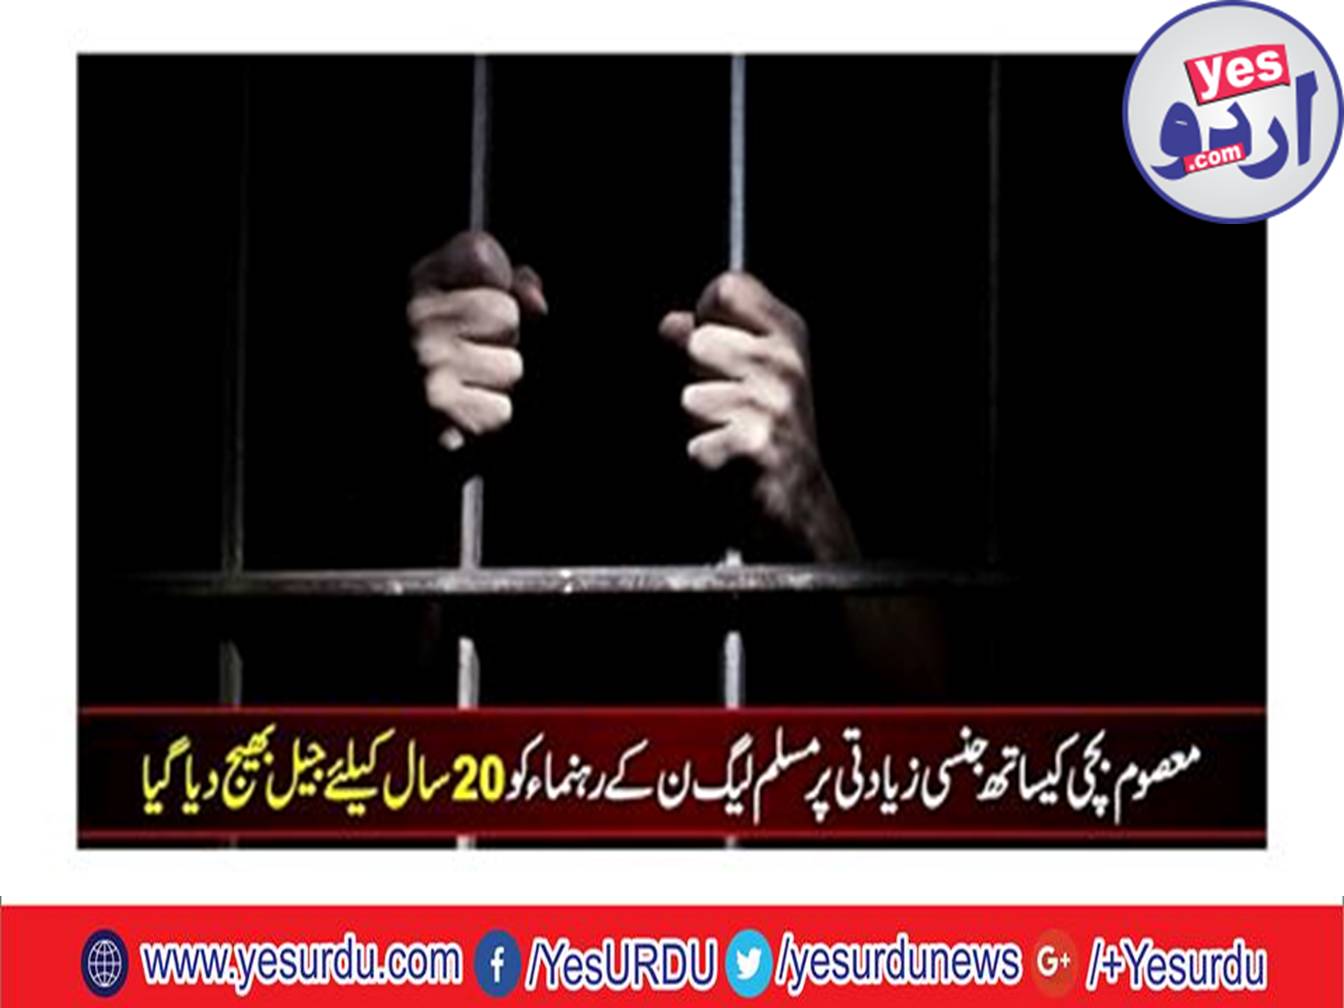 The PML-N leader was sentenced to jail for 20 years on sexual abuse with innocent children